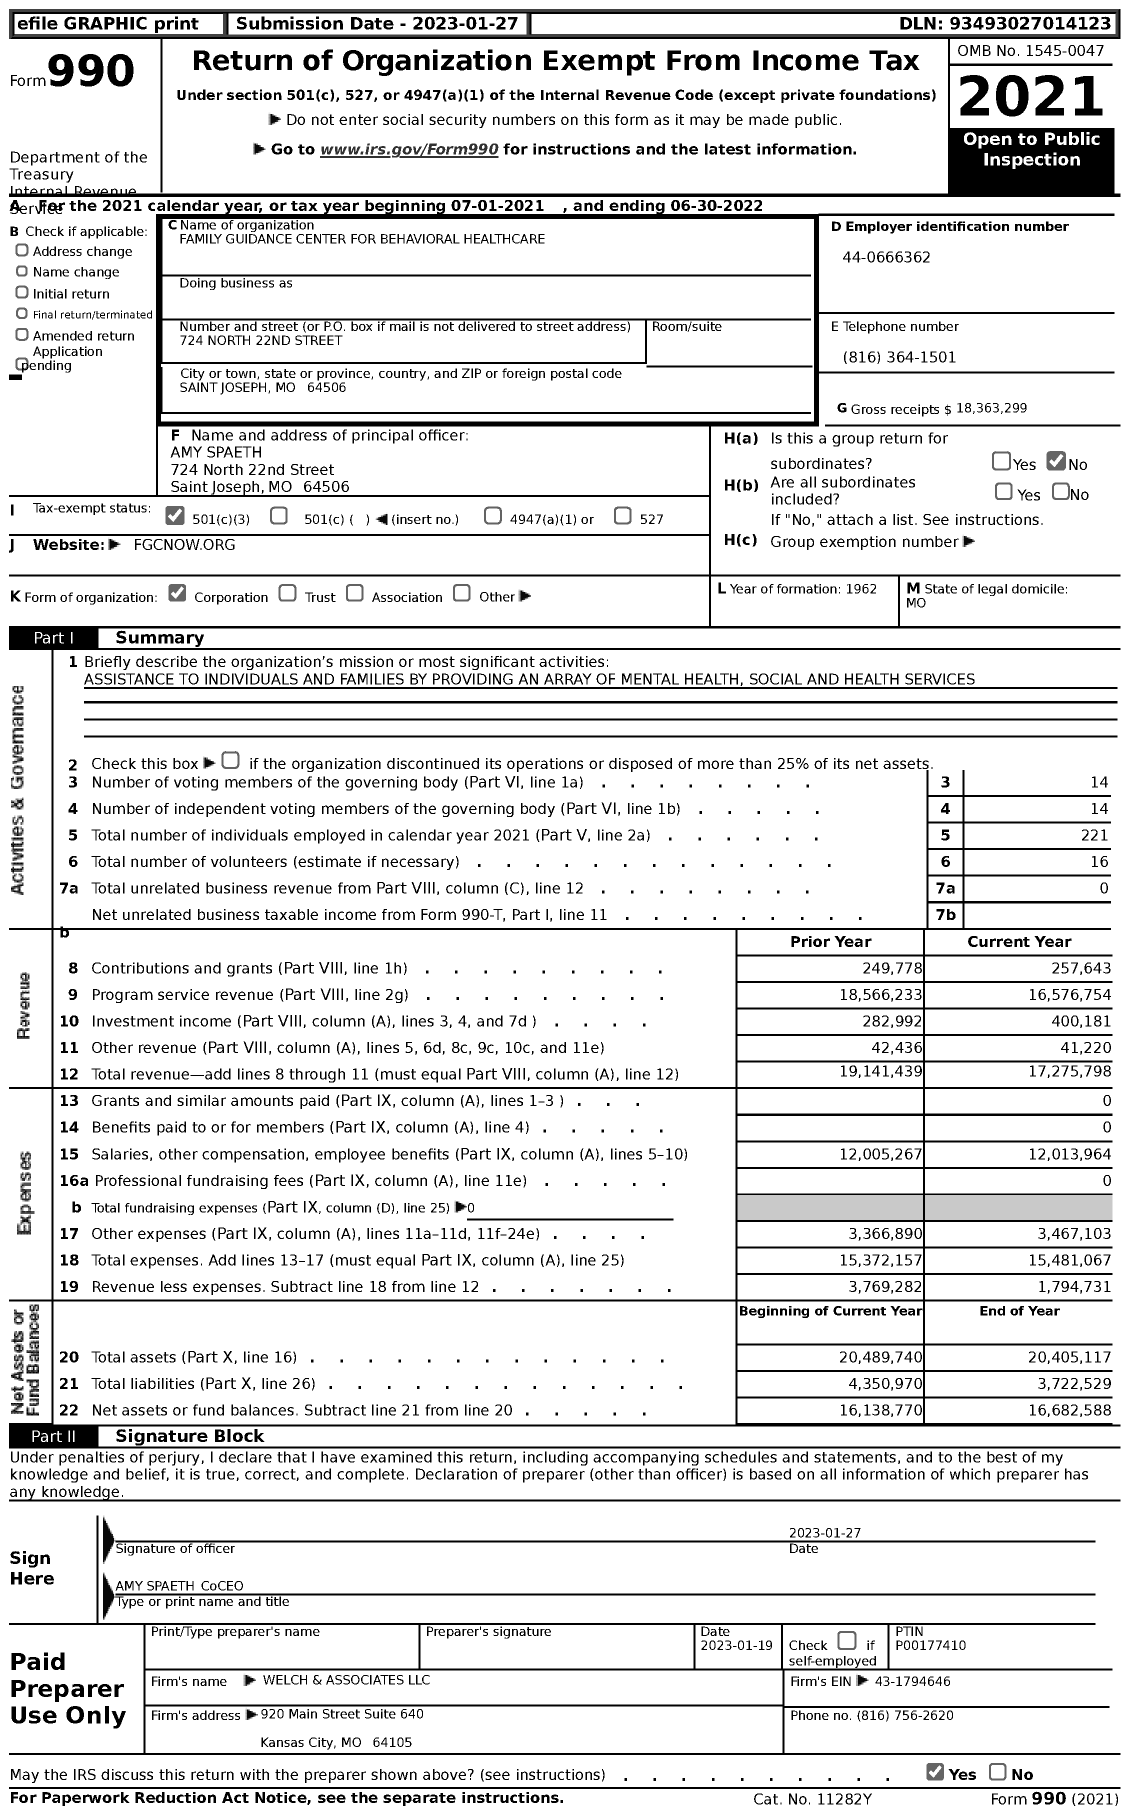 Image of first page of 2021 Form 990 for Family Guidance Center for Behavioral Healthcare